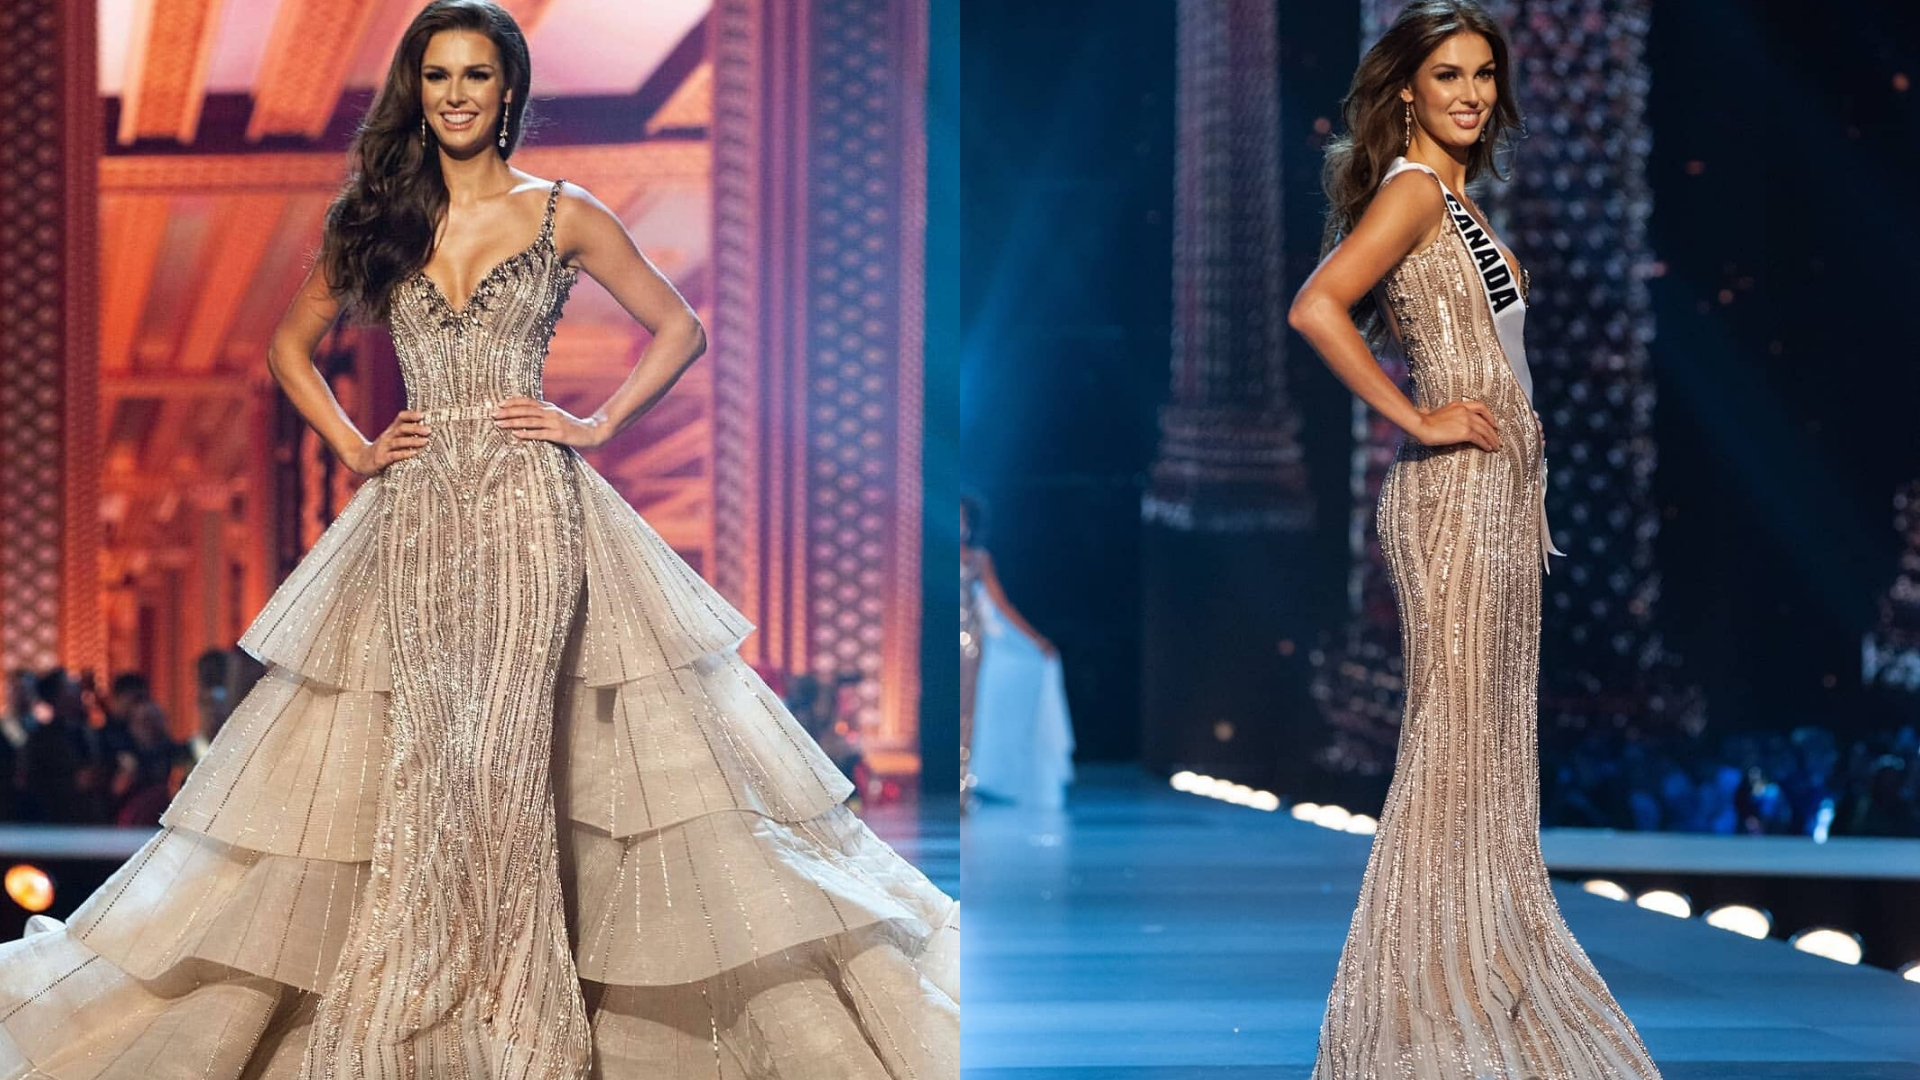 This Model Just Wore A DubaiBased Designer At The Miss Universe